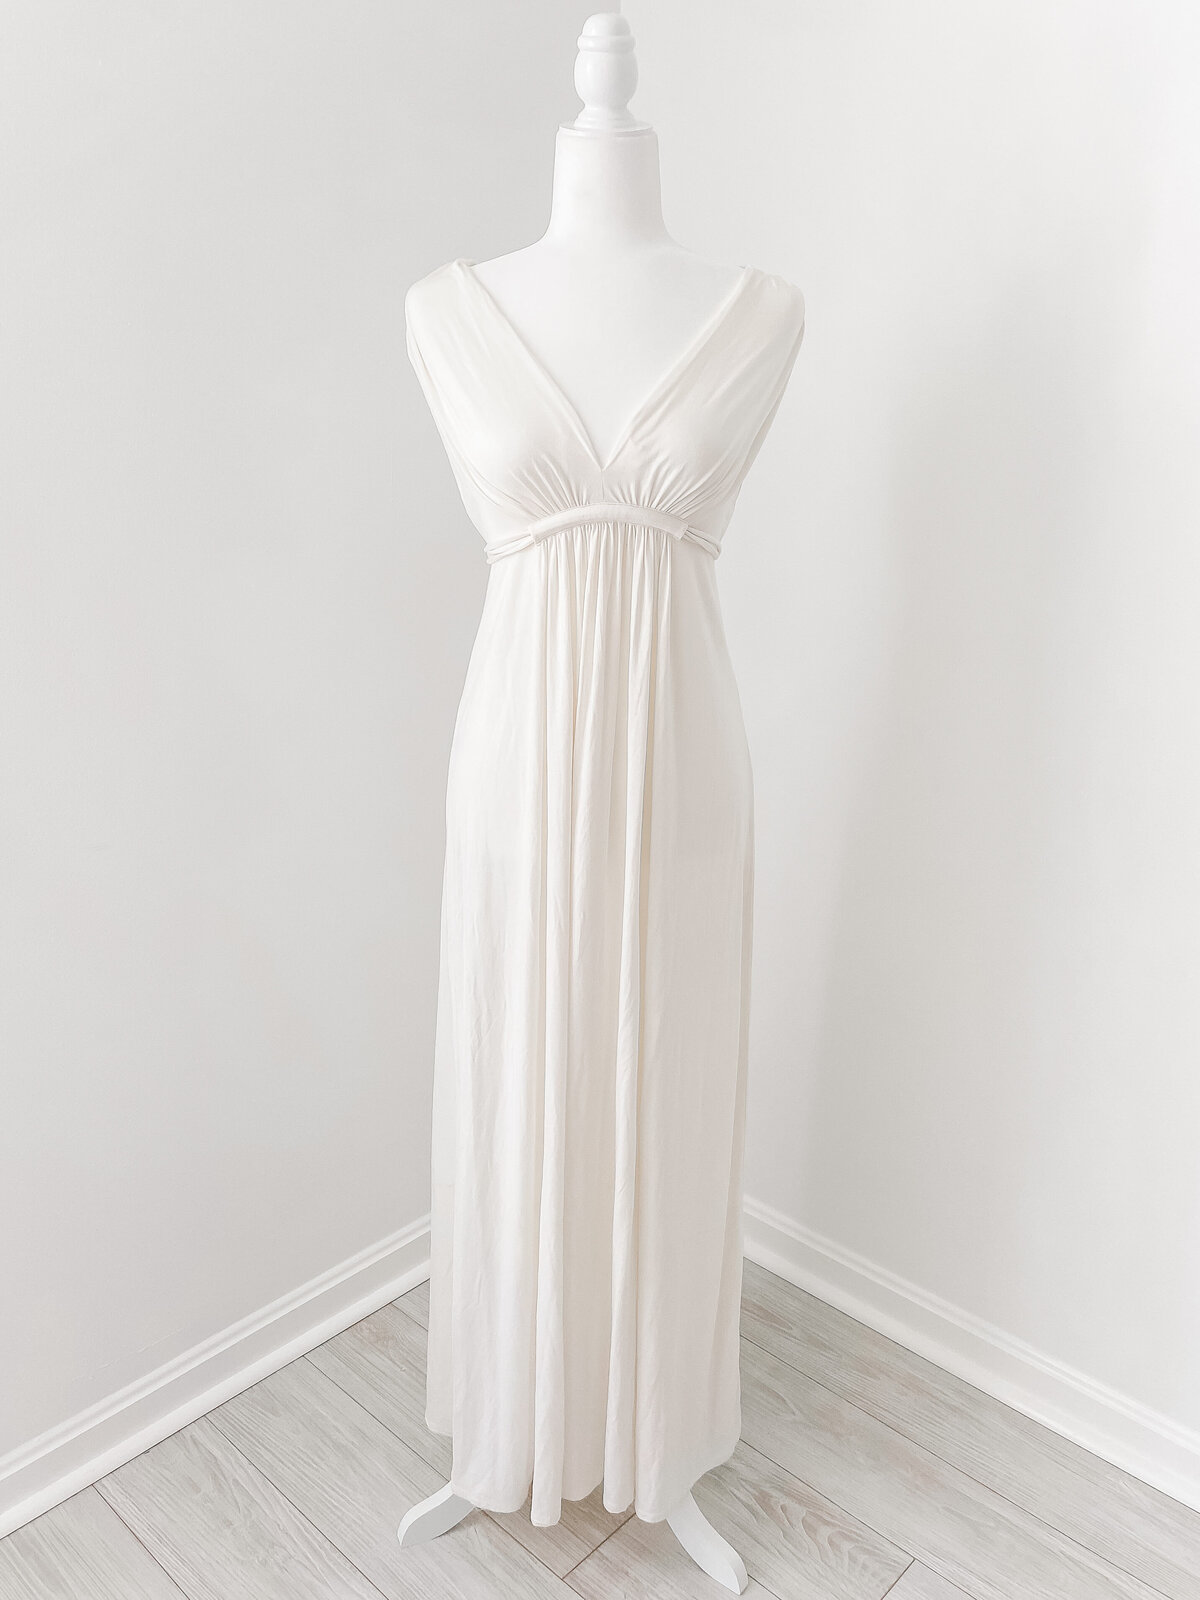 A cream maxi dress without sleeves and an empire waist by Washington DC Photographer